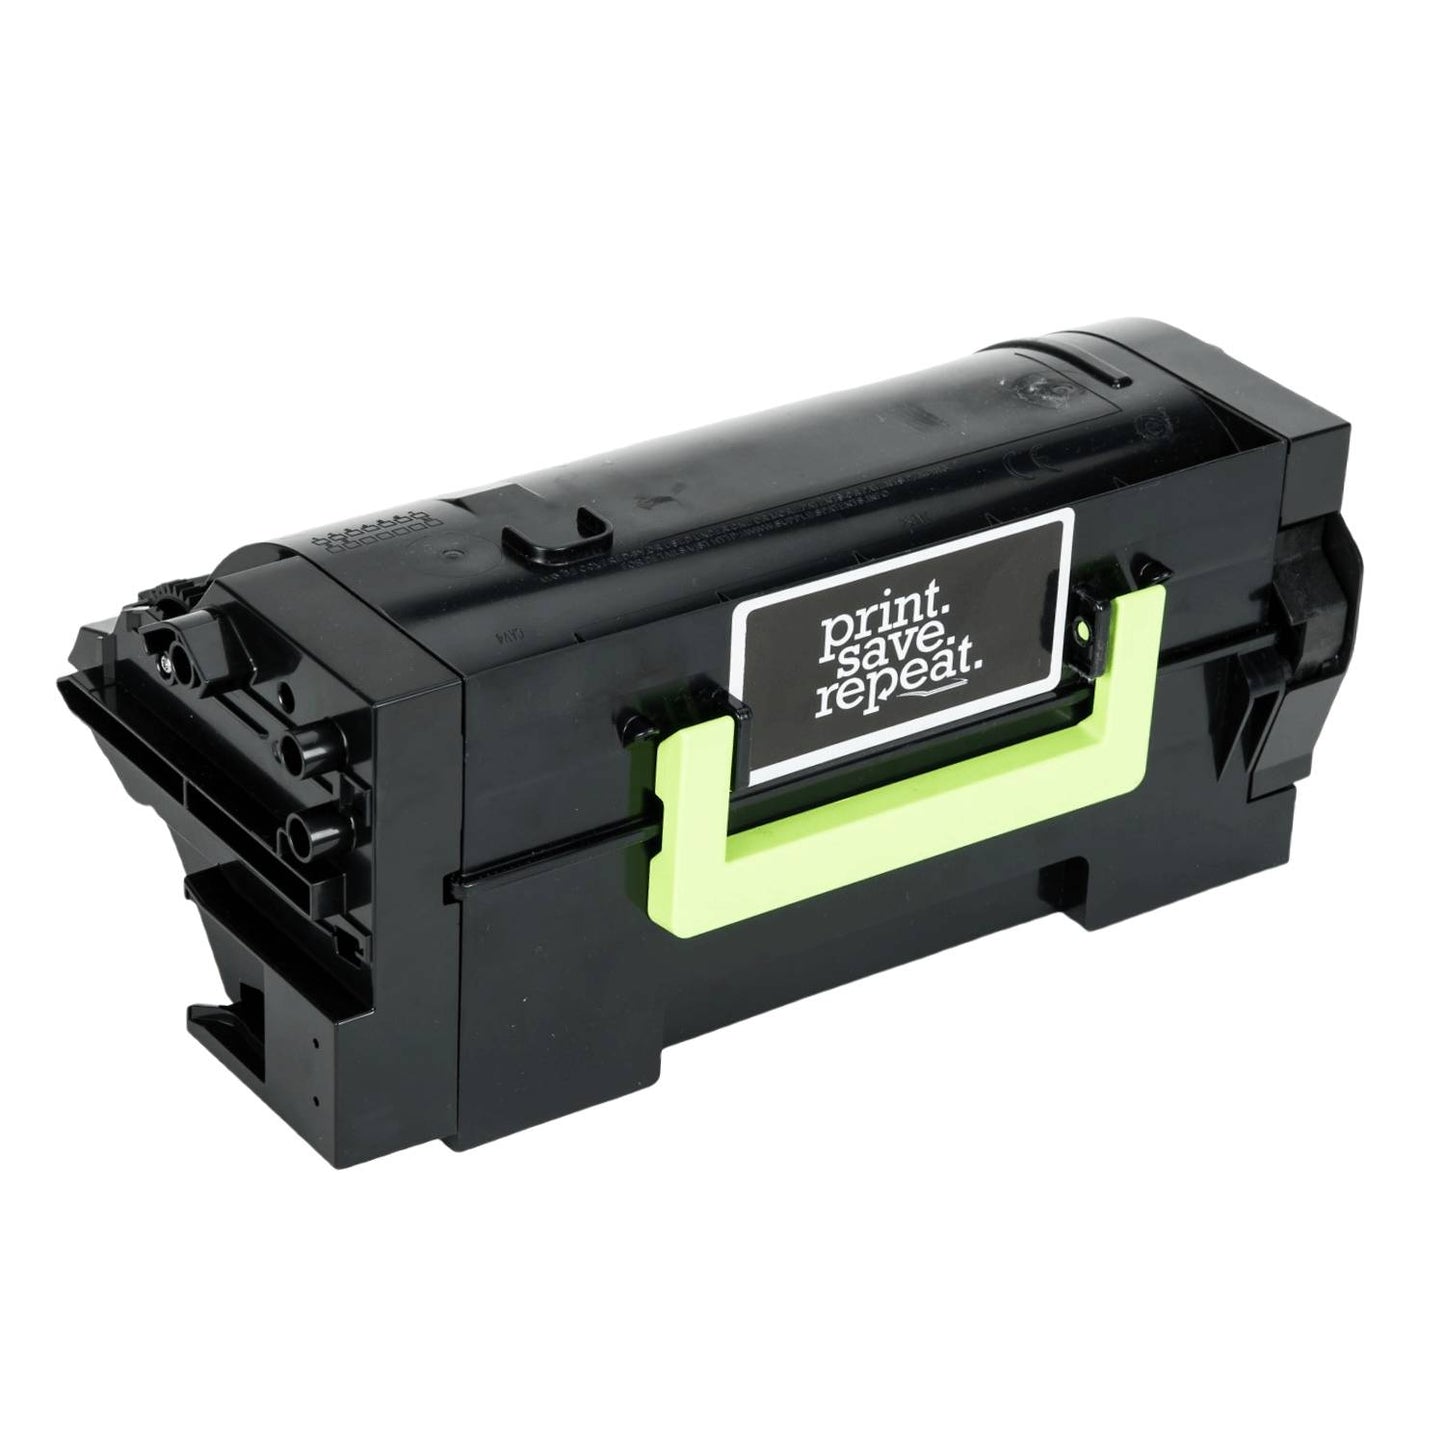 Print.Save.Repeat. Lexmark 58D1000 Standard Yield Remanufactured Toner Cartridge for MS725, MS821, MS822, MS823, MS824, MS825, MS826, MX721, MX722, MX725, MX822, MX824, MX826 [7,500 Pages]